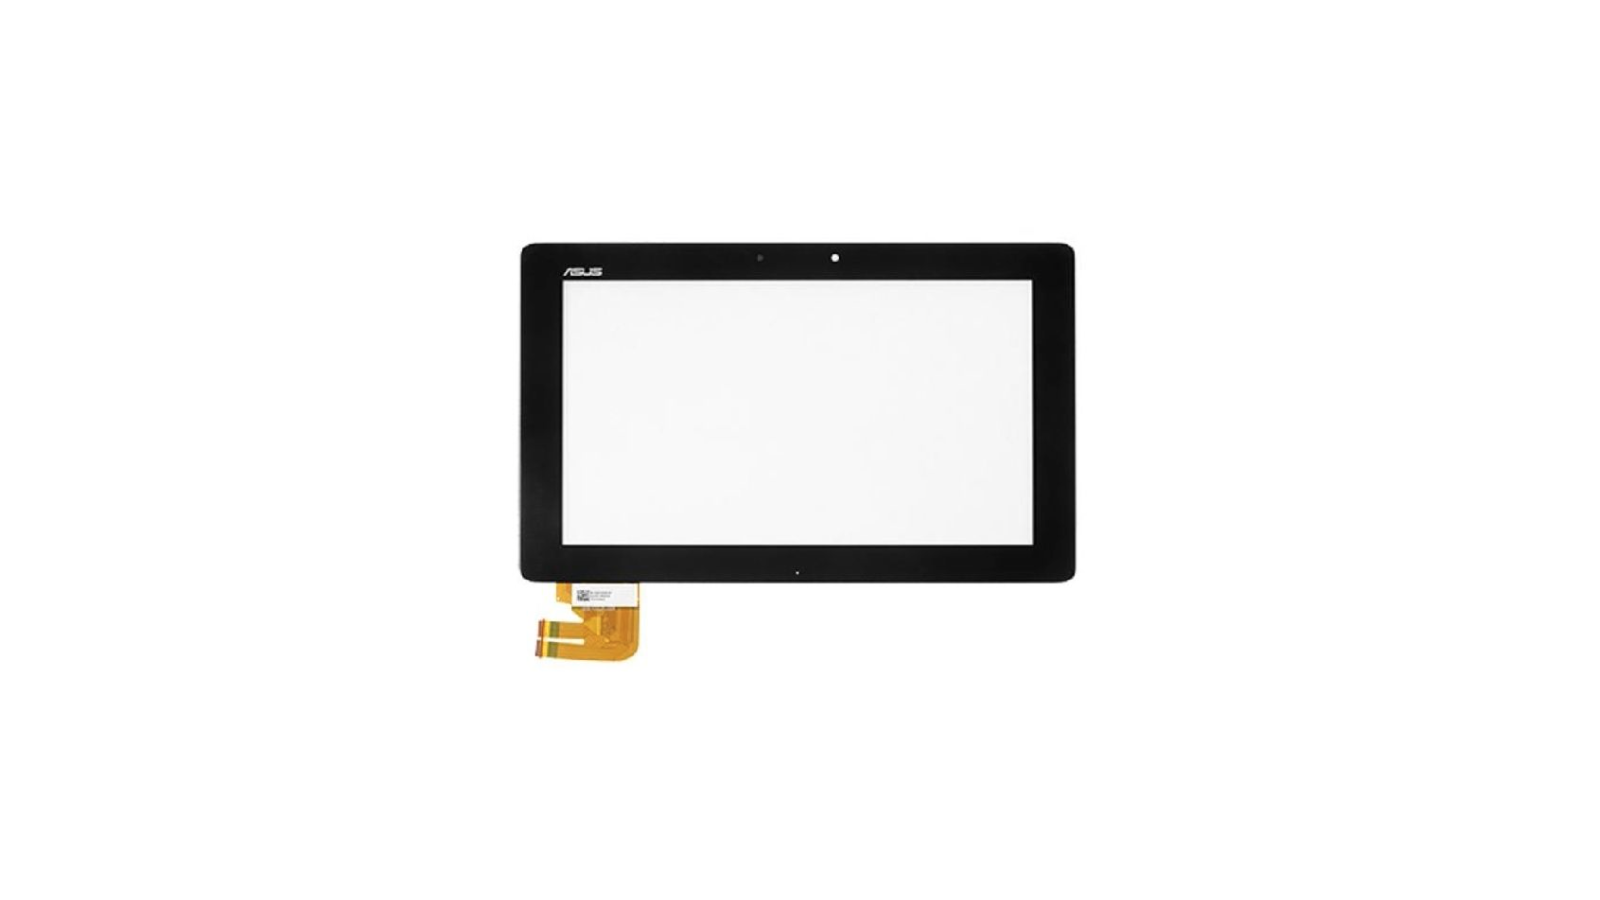 Touch screen Asus Transformer Pad TF300 TF300T TF300TG 5158N